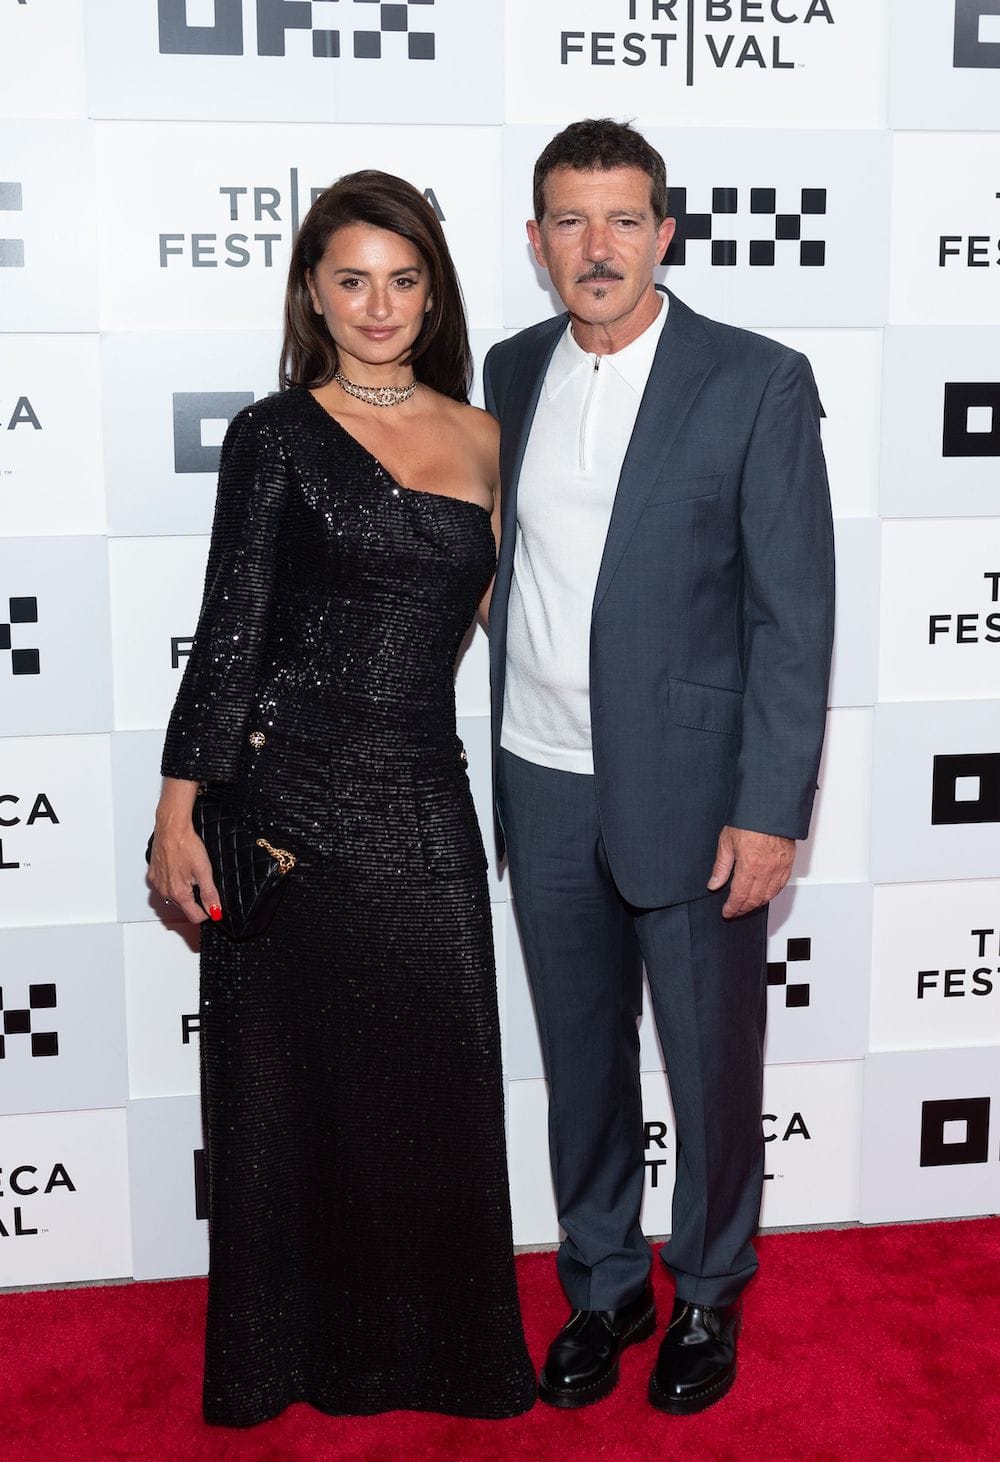 Penelope Cruz and her co-star Antonio Banderas at 'Official Competition' Tribeca Film Festival Premiere.